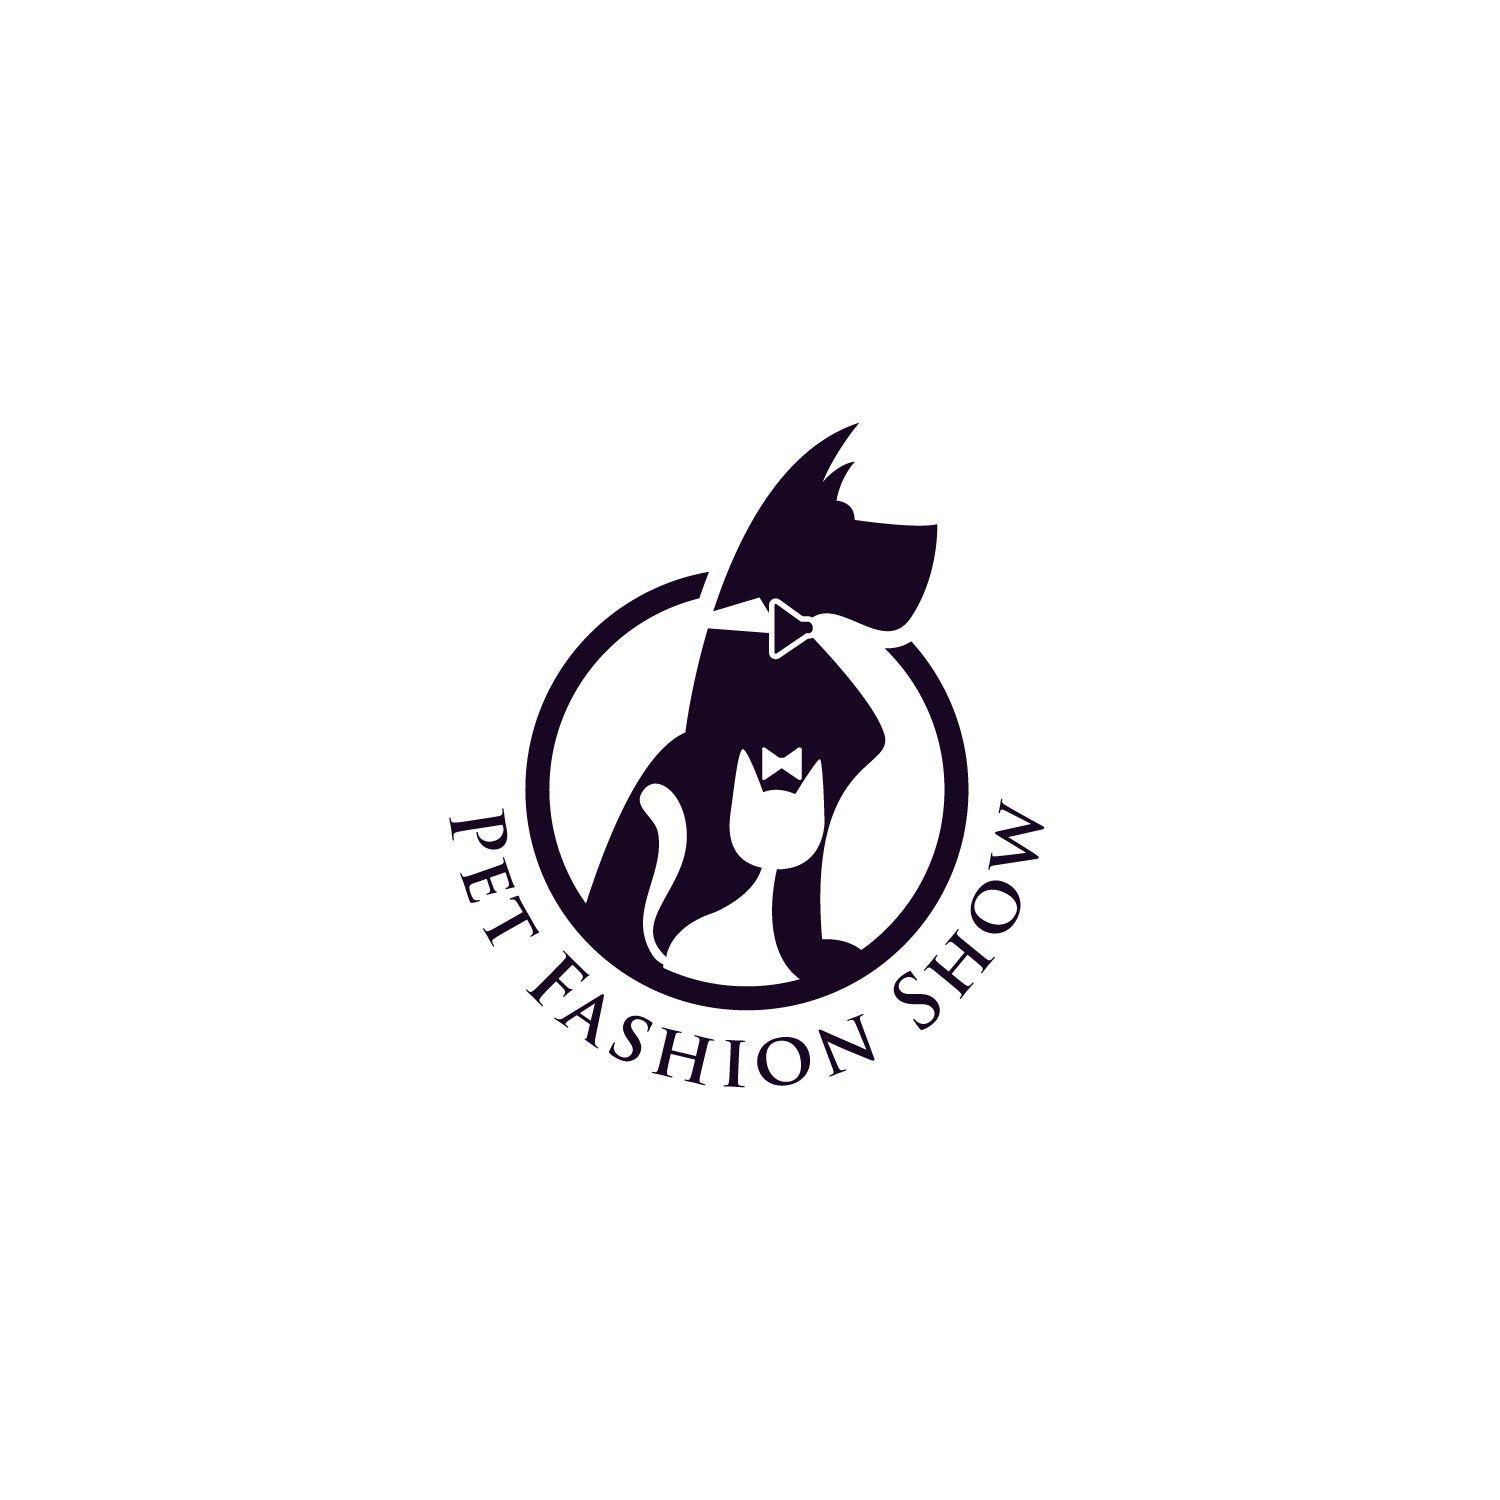 Fashion Show Logo - Elegant, Playful, Business Logo Design for Pet Fashion Show by at-as ...